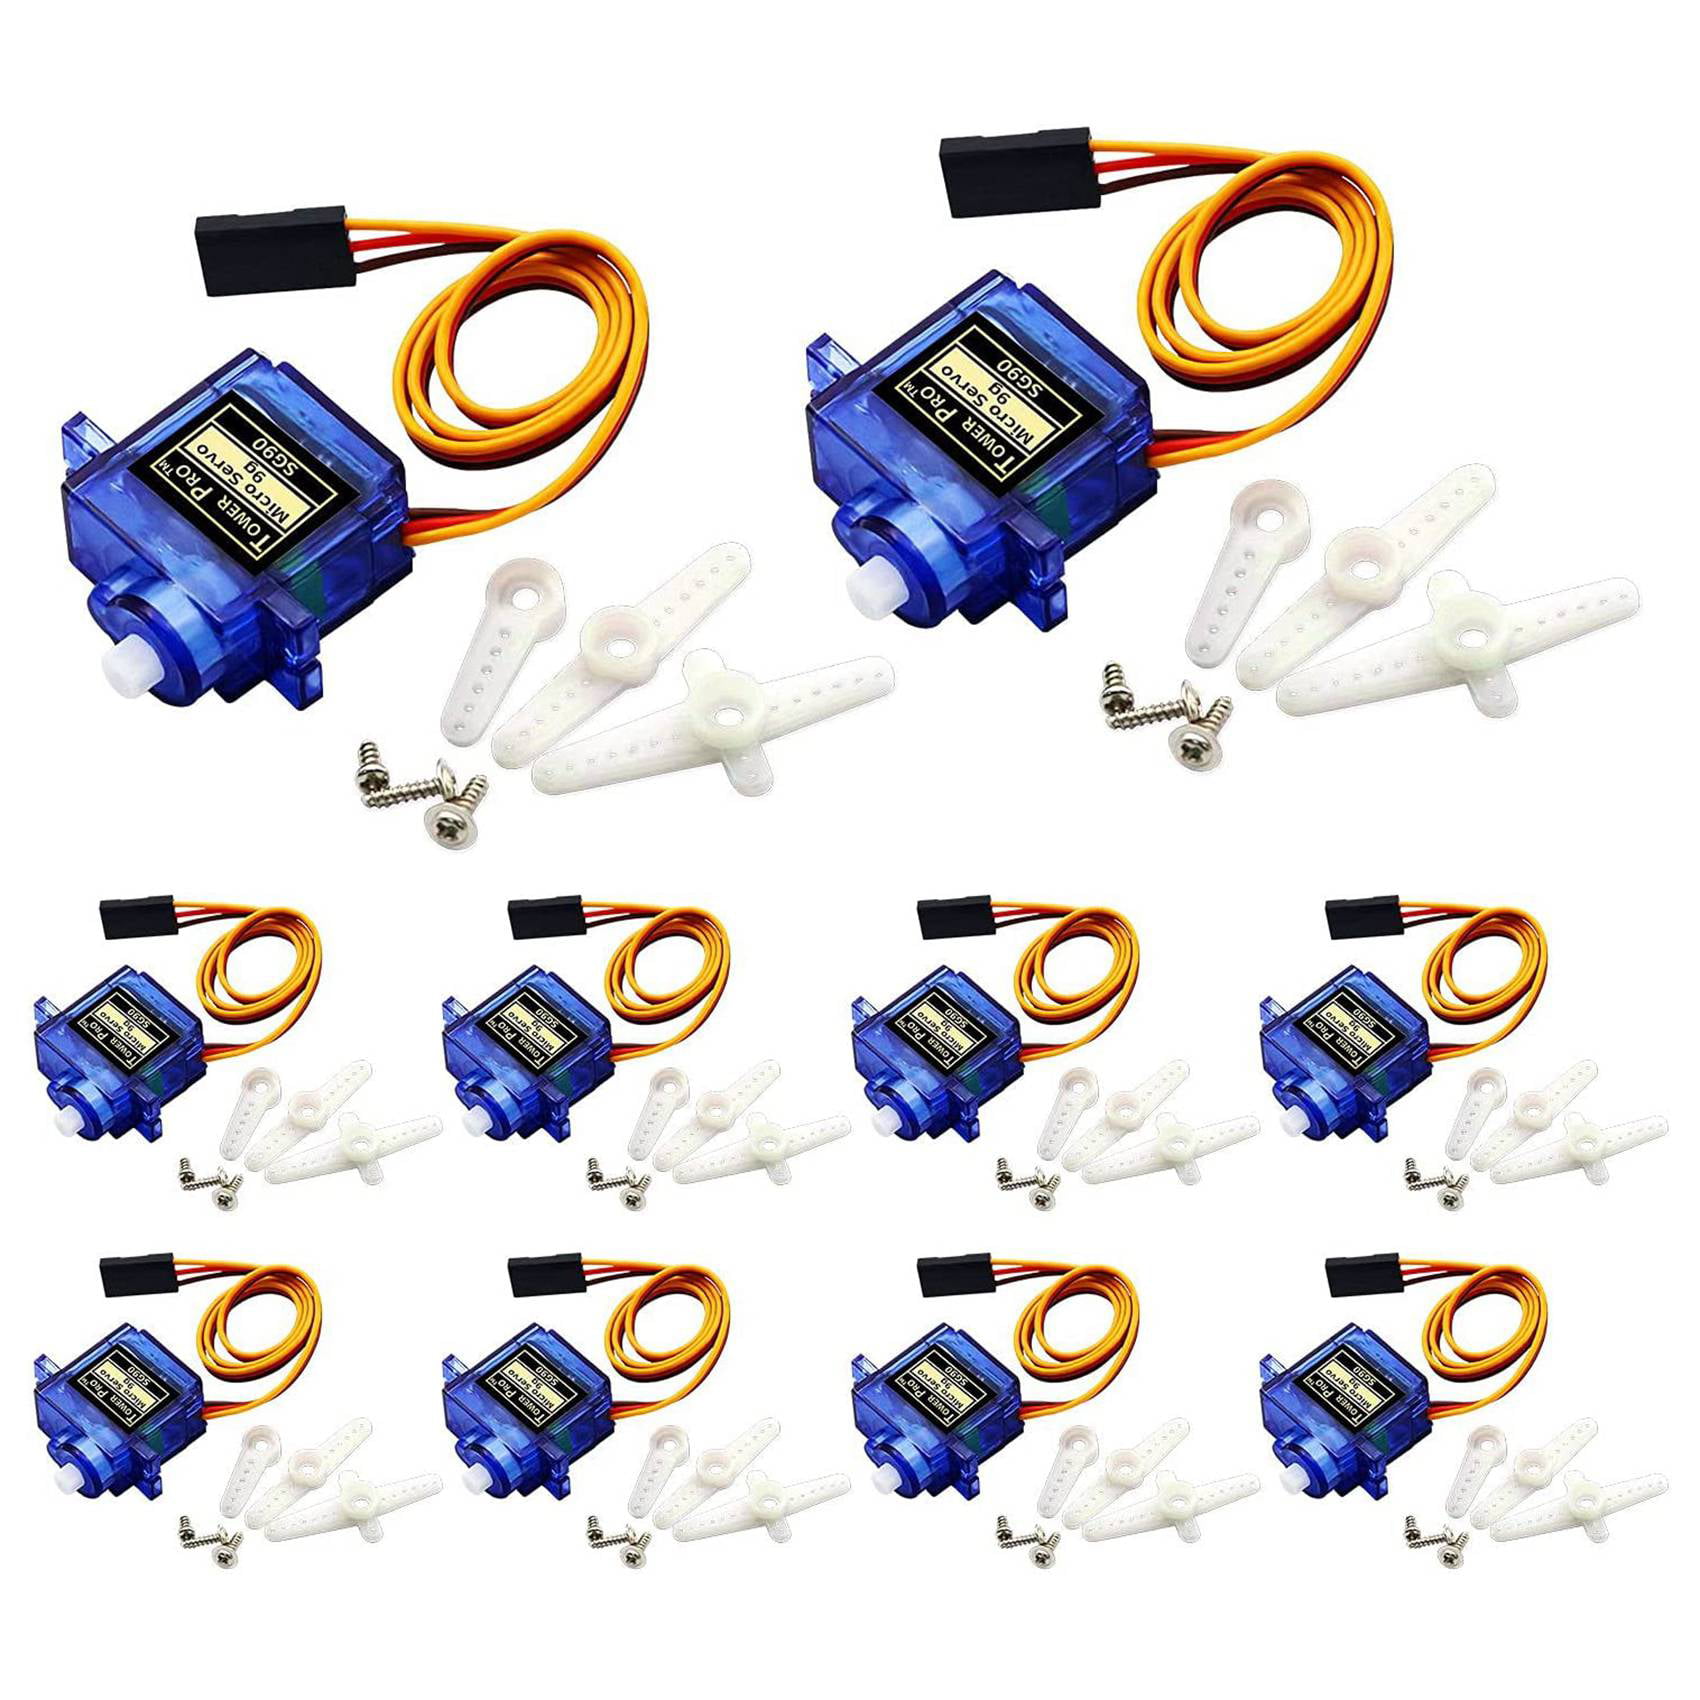 10pcs 9G SG90 Micro Servo motor RC Robot Helicopter Airplane Control Car Boat SM 